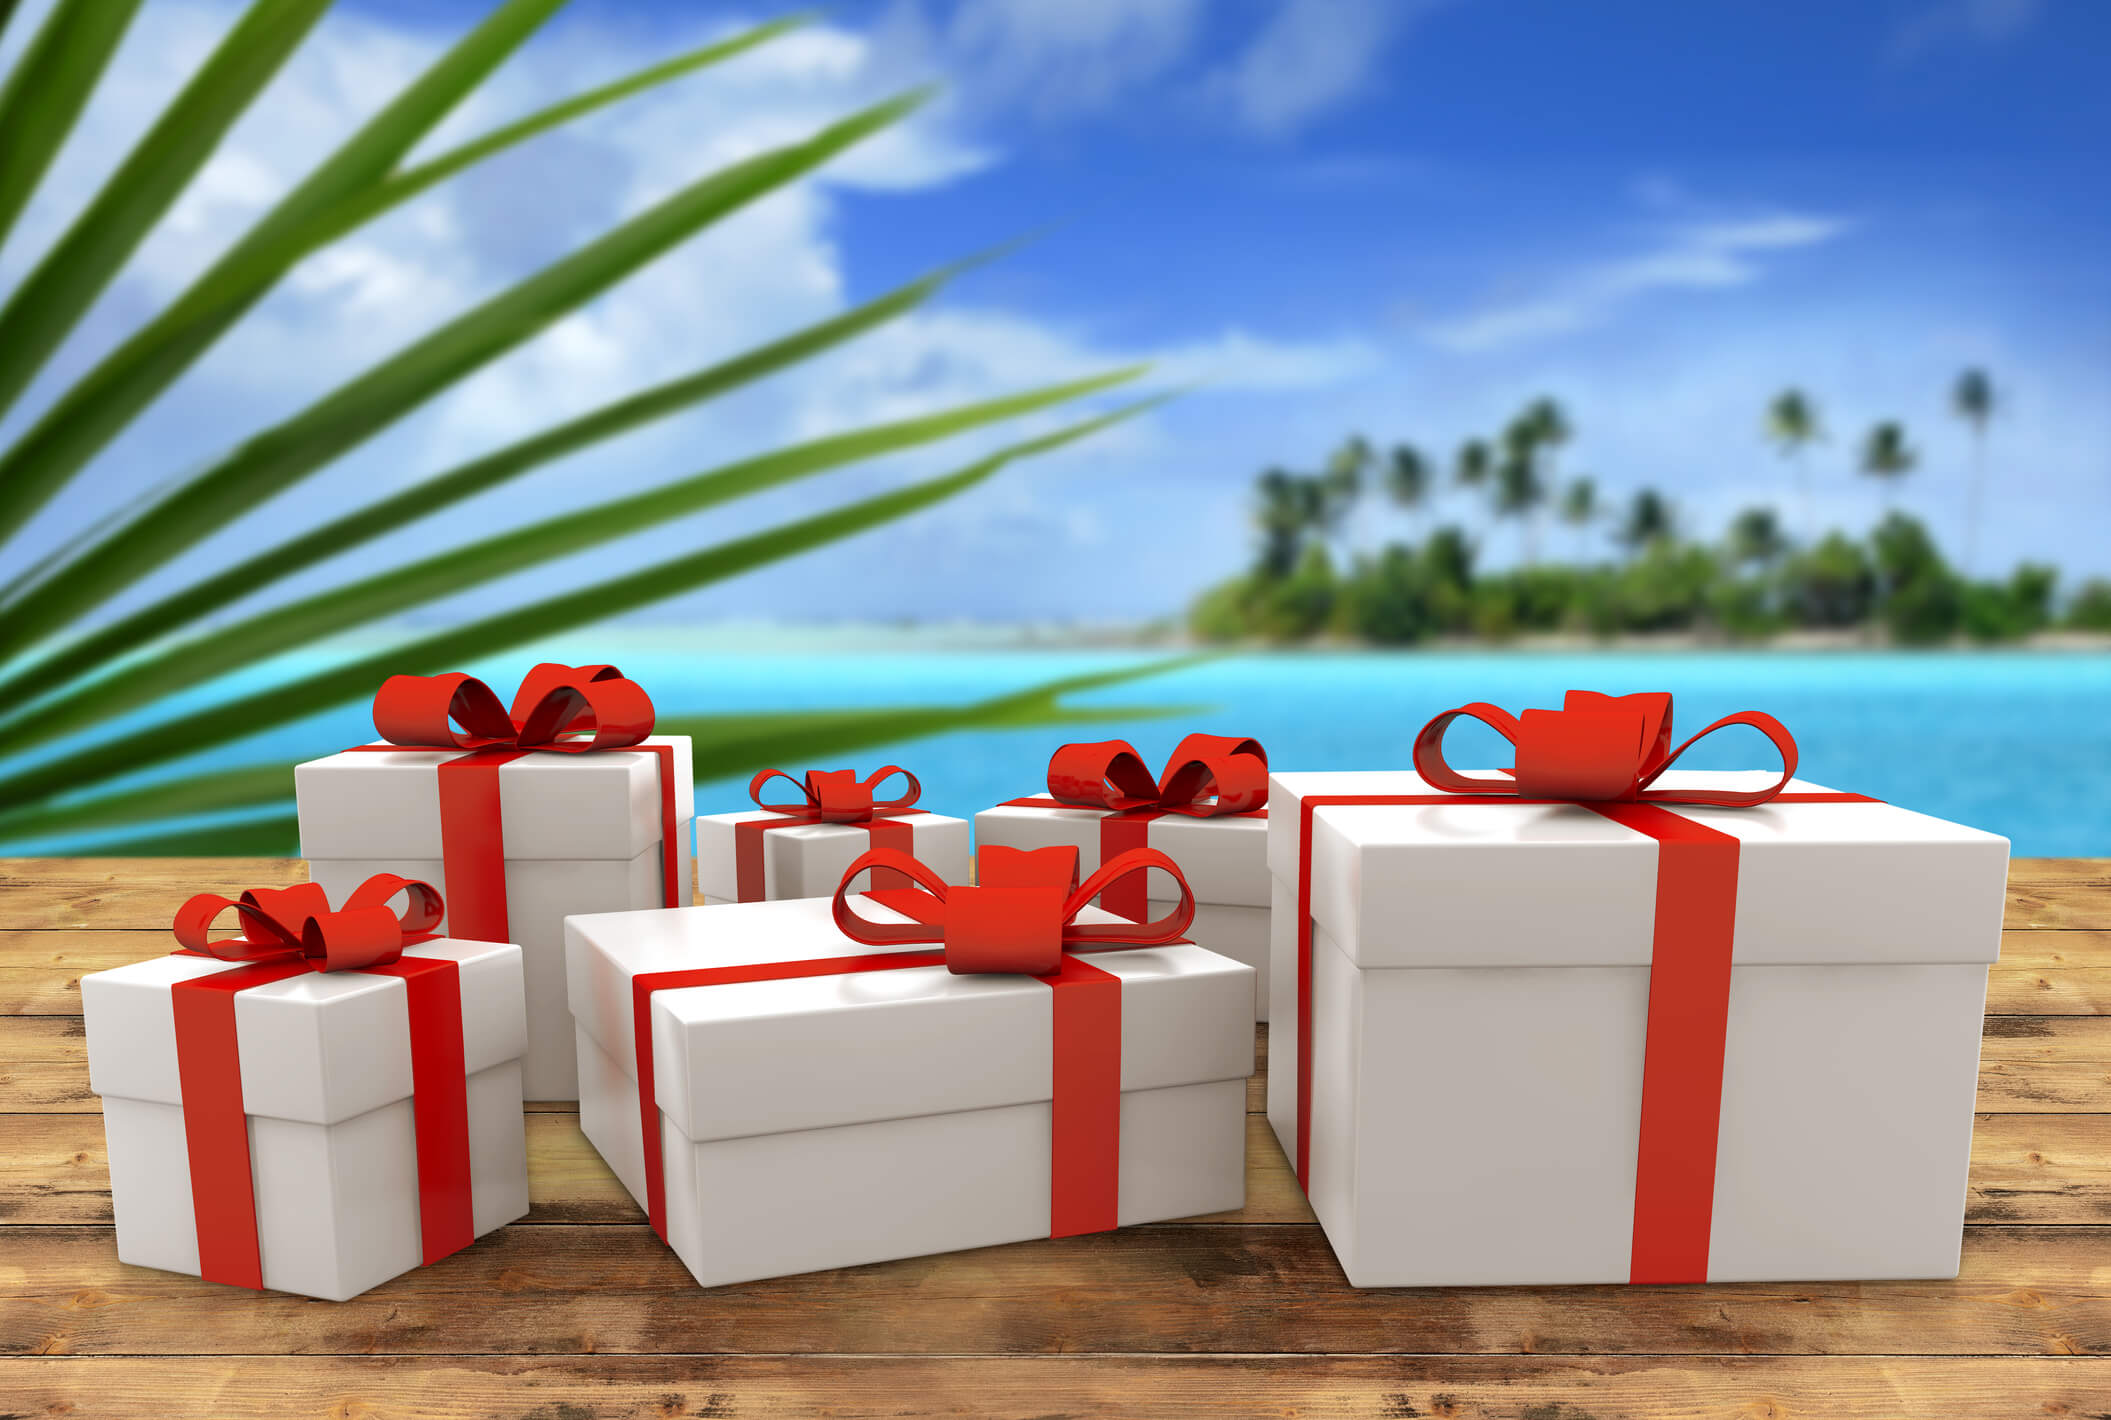 Gift packages with bows, sitting on a table at the beach.